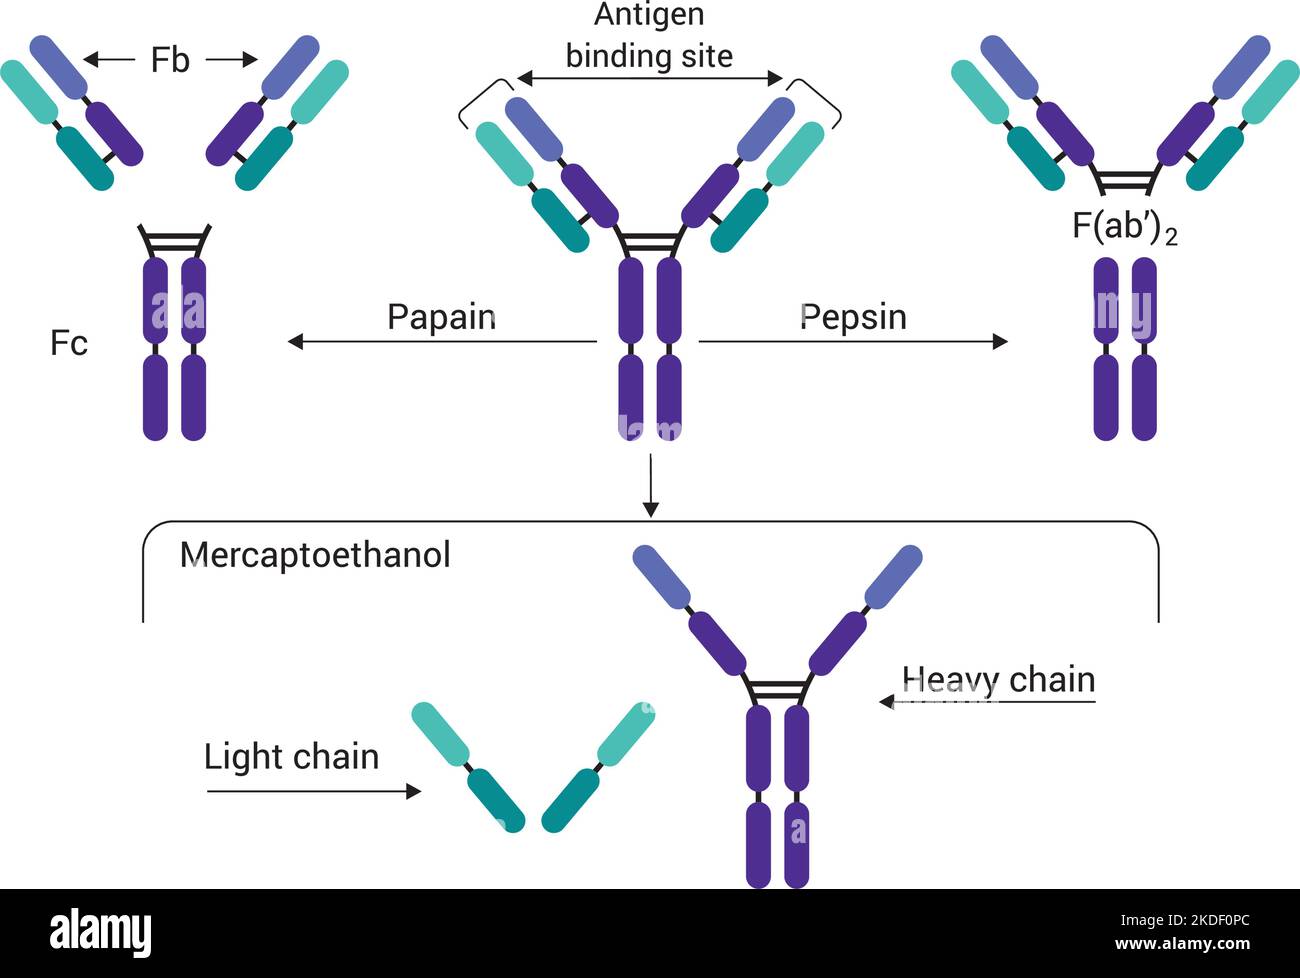 Antibody structure of immunoglobulin with enzymes papain and pepsin, the basic structure of an antibody, showing the light chains and heavy chains Stock Vector